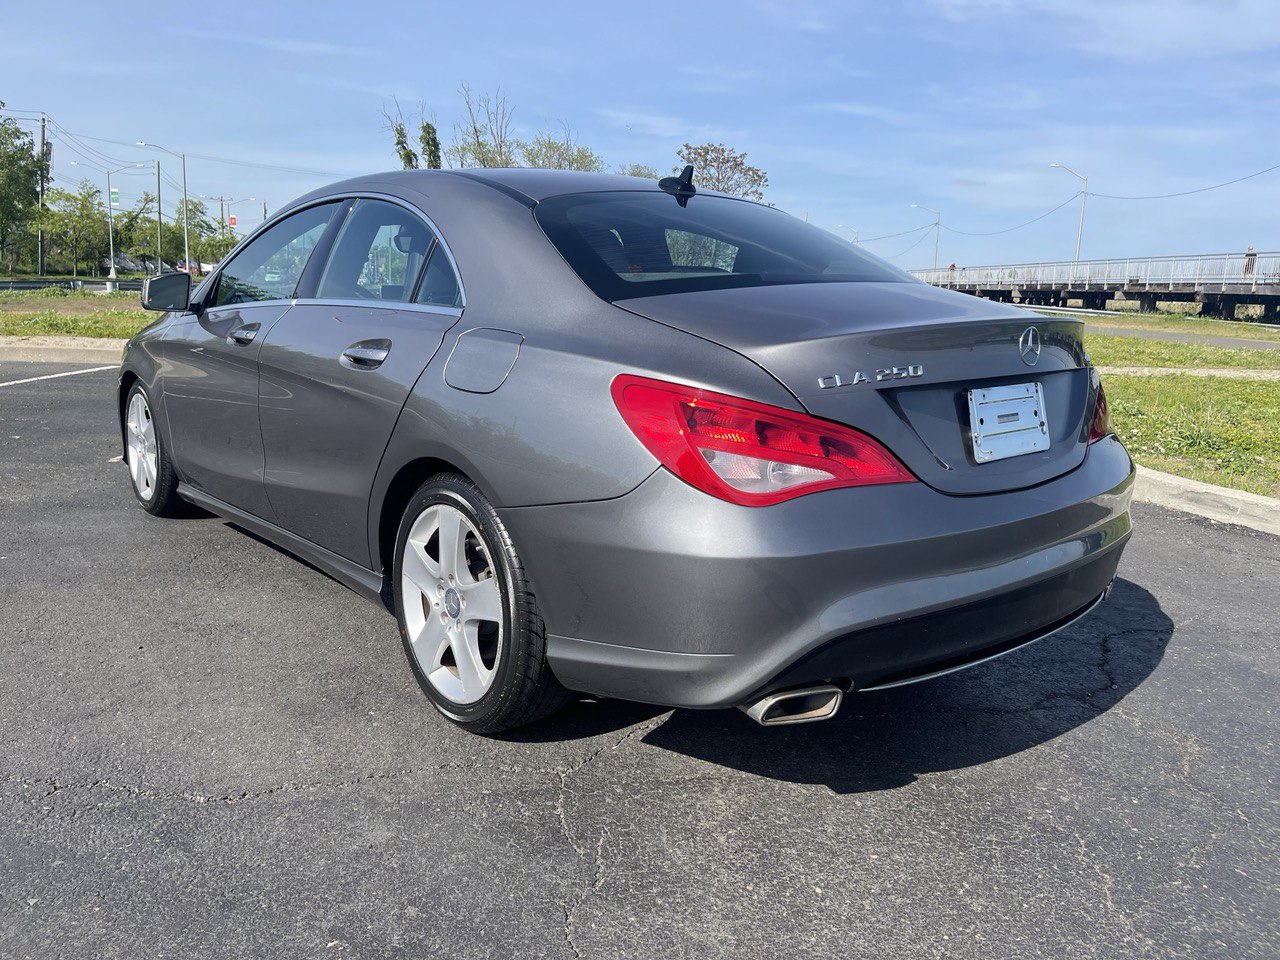 Used - Mercedes-Benz CLA 250 4MATIC AWD Sedan for sale in Staten Island NY